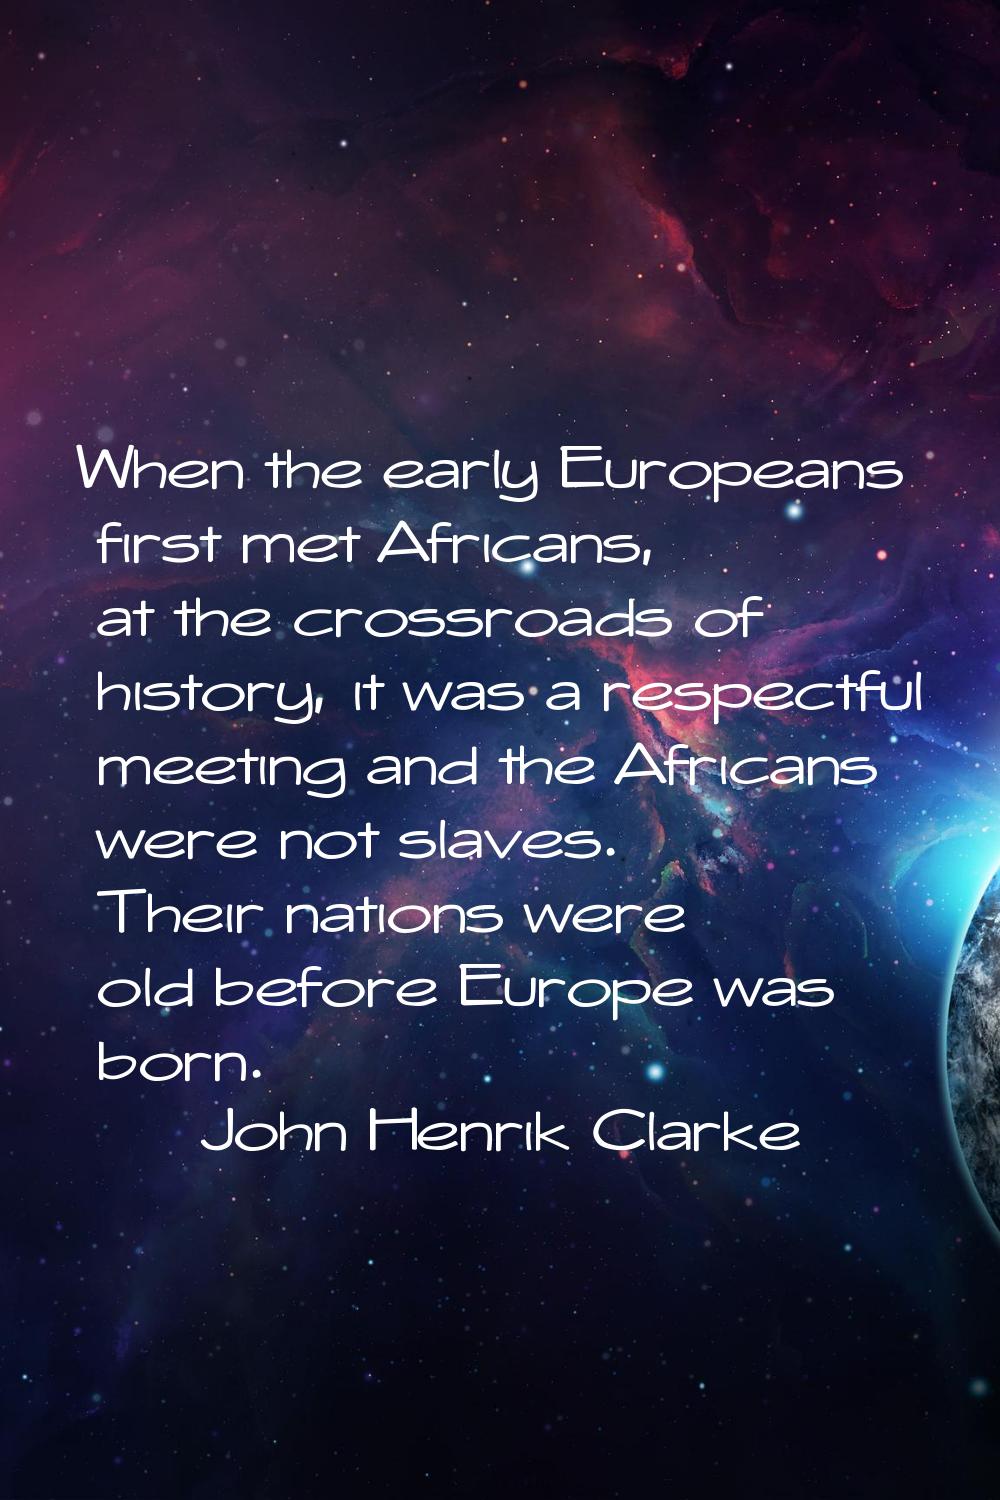 When the early Europeans first met Africans, at the crossroads of history, it was a respectful meet